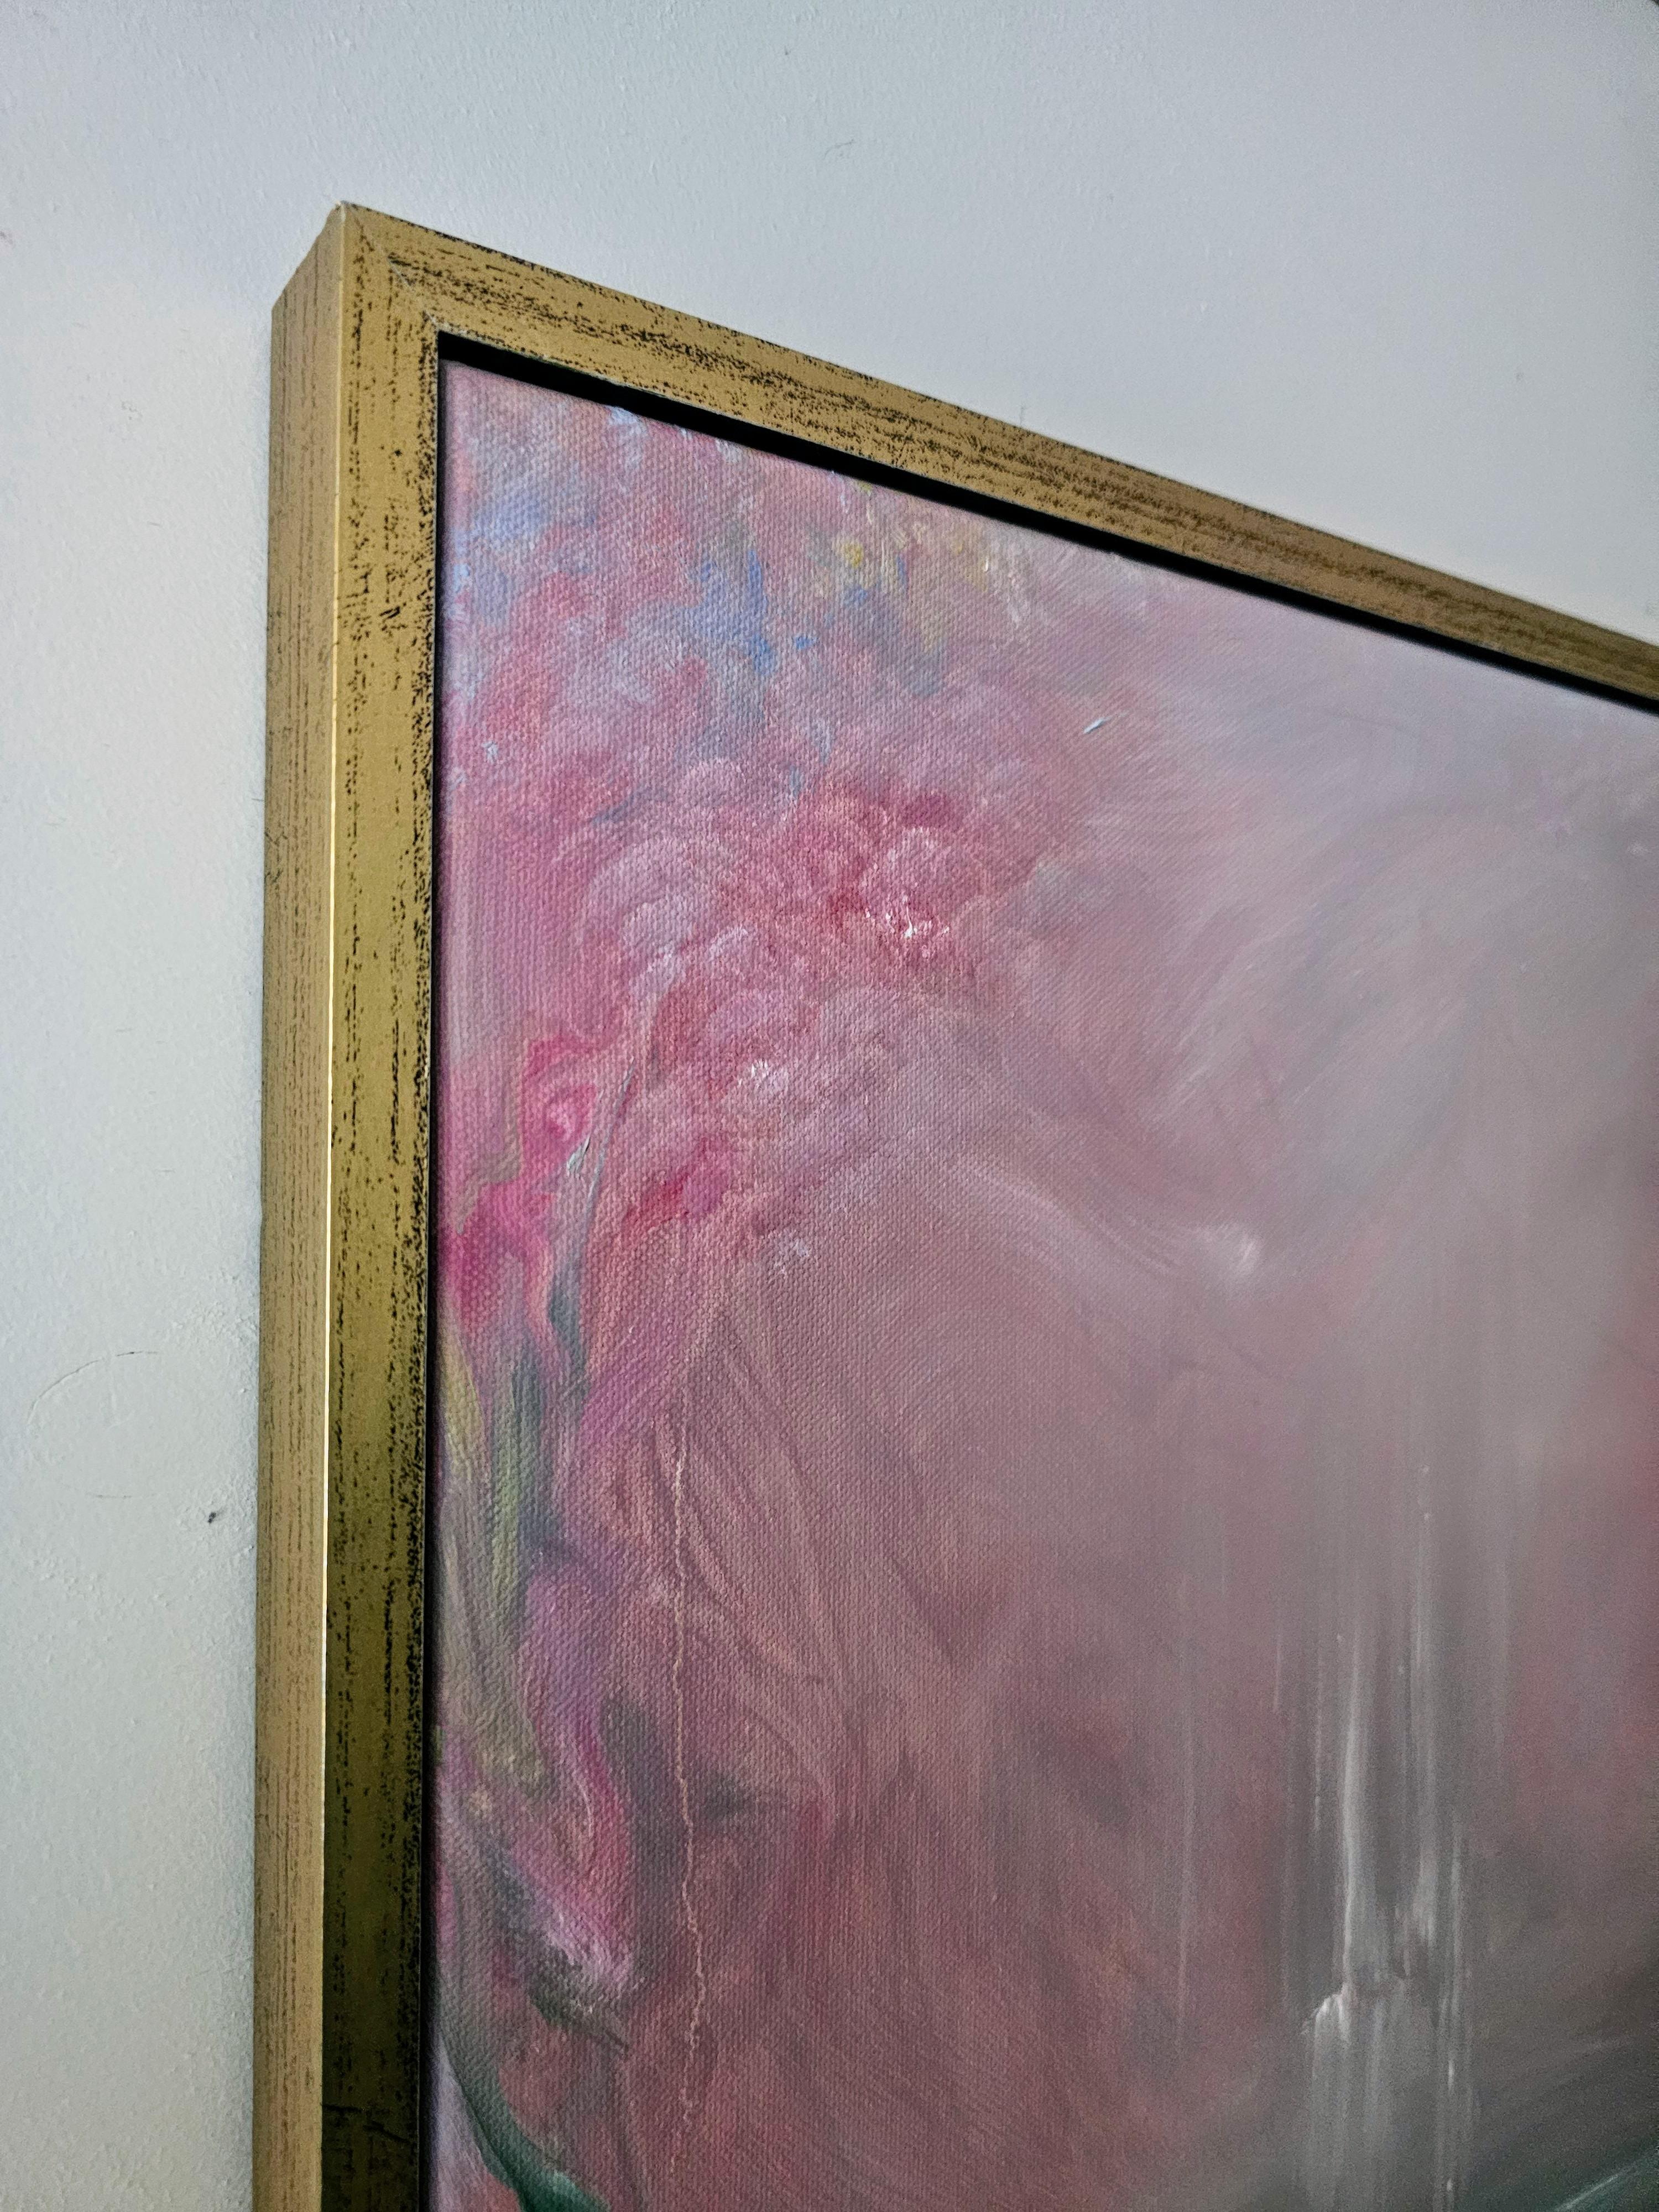 Water baby - Framed pink abstract floral nature painting - Abstract Impressionist Painting by Jennifer L. Baker